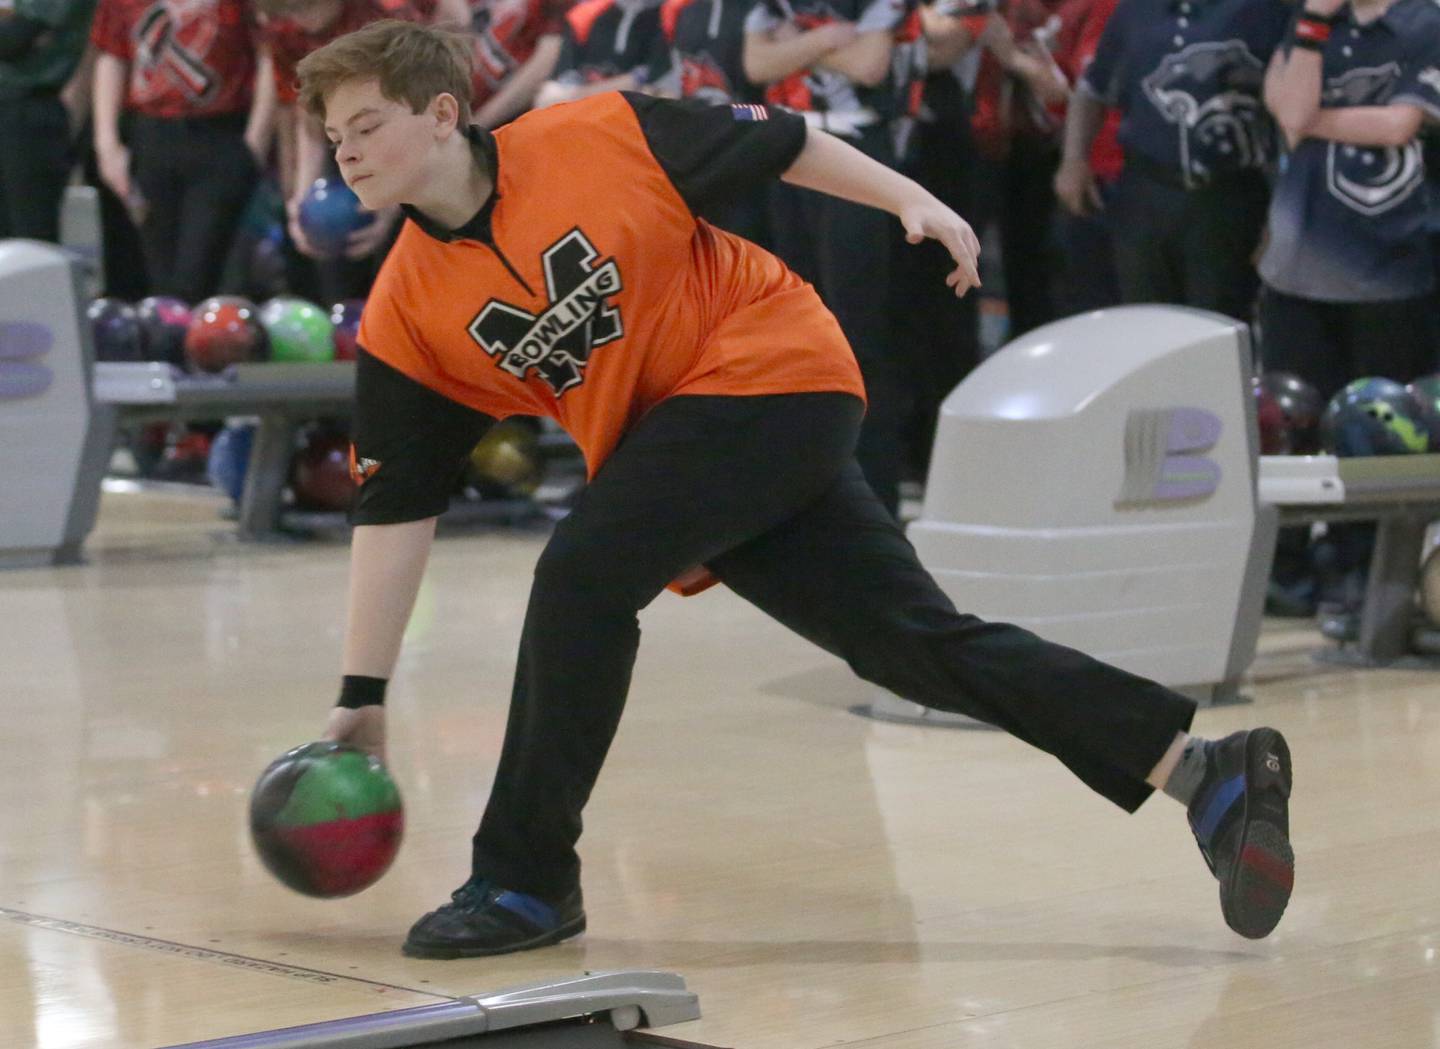 Minooka's Spencer Bruinsma bowls in the Regional Bowling meet on Saturday, Jan. 14, 2023 at the Illinois Valley Super Bowl in Peru.